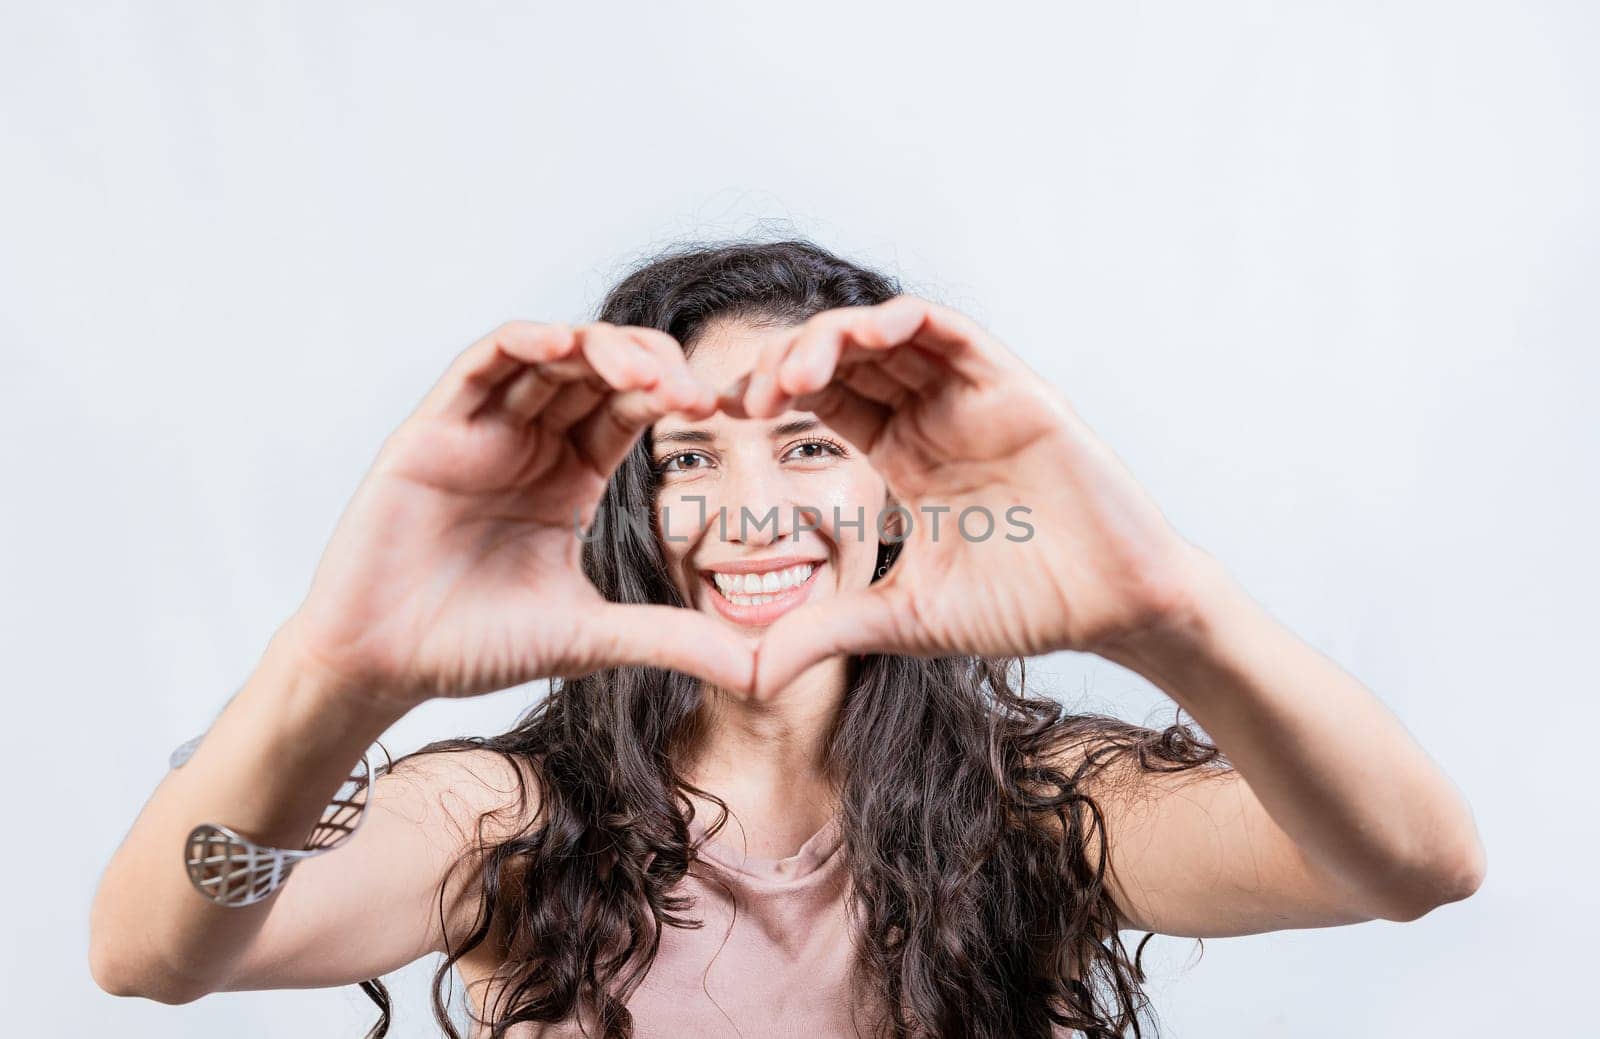 Happy girl making heart shape with hands isolated. Smiling young woman making heart shape with her hands. Teen girl making heart shape with her hands